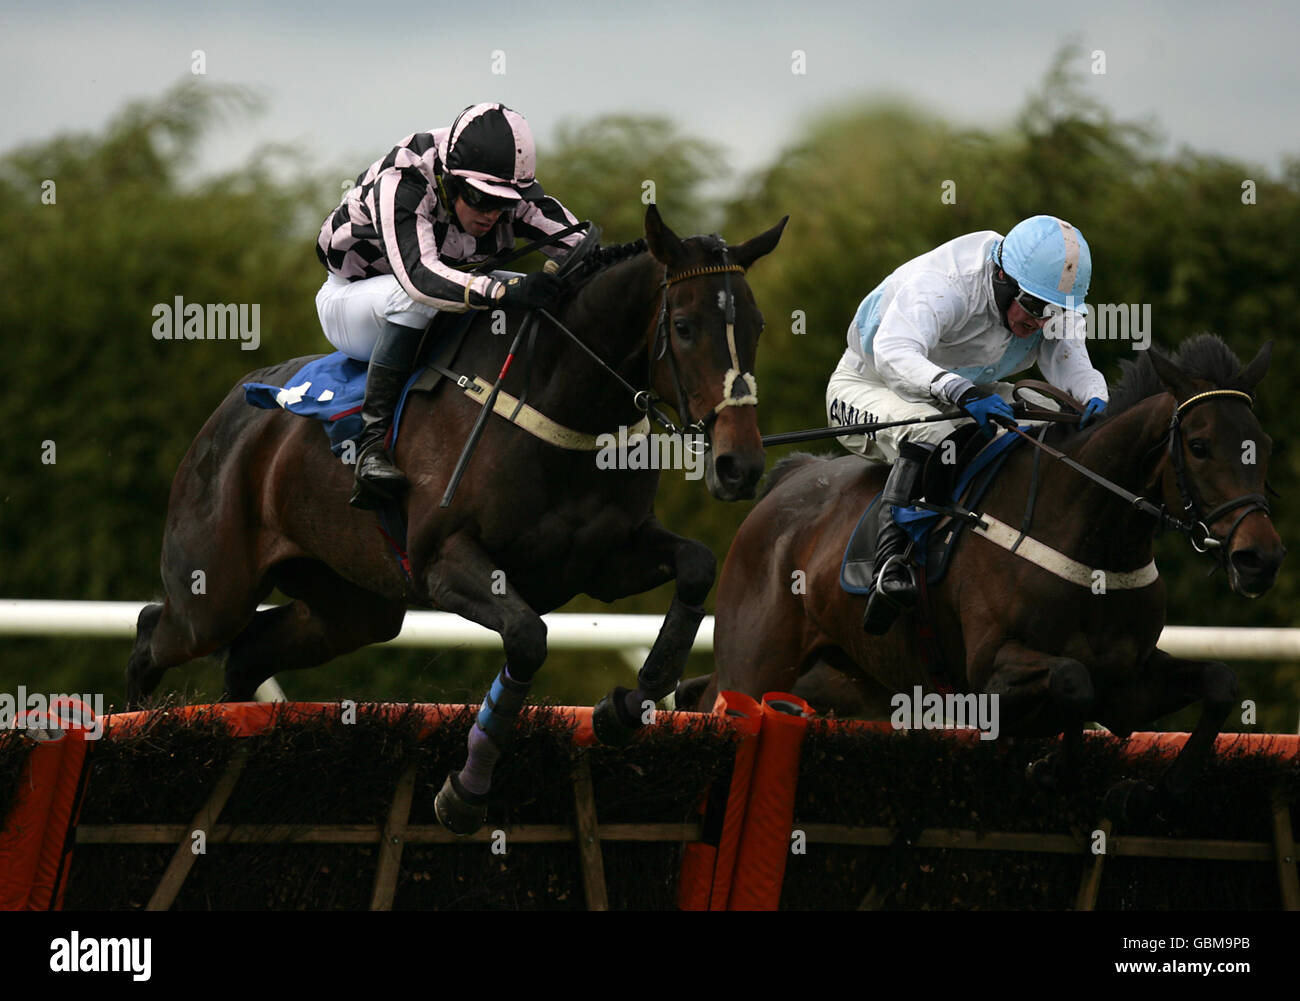 Sylroy ridden by jockey Peter Toole (L) jumps the last fence to win the Wye Valley Brewery Mares' Novices' Hurdle Race at Hereford Racecouse Stock Photo